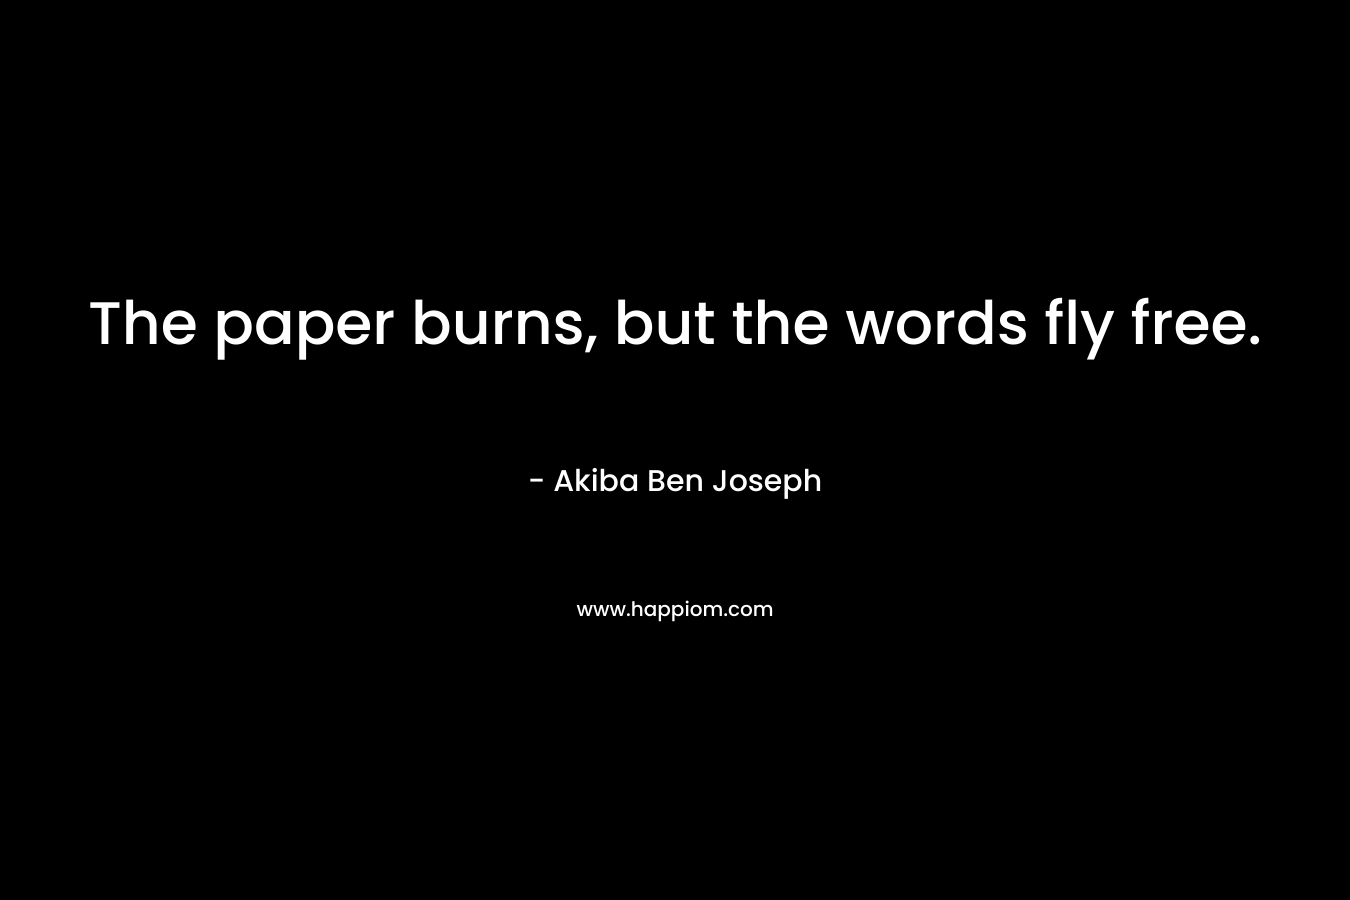 The paper burns, but the words fly free. – Akiba Ben Joseph